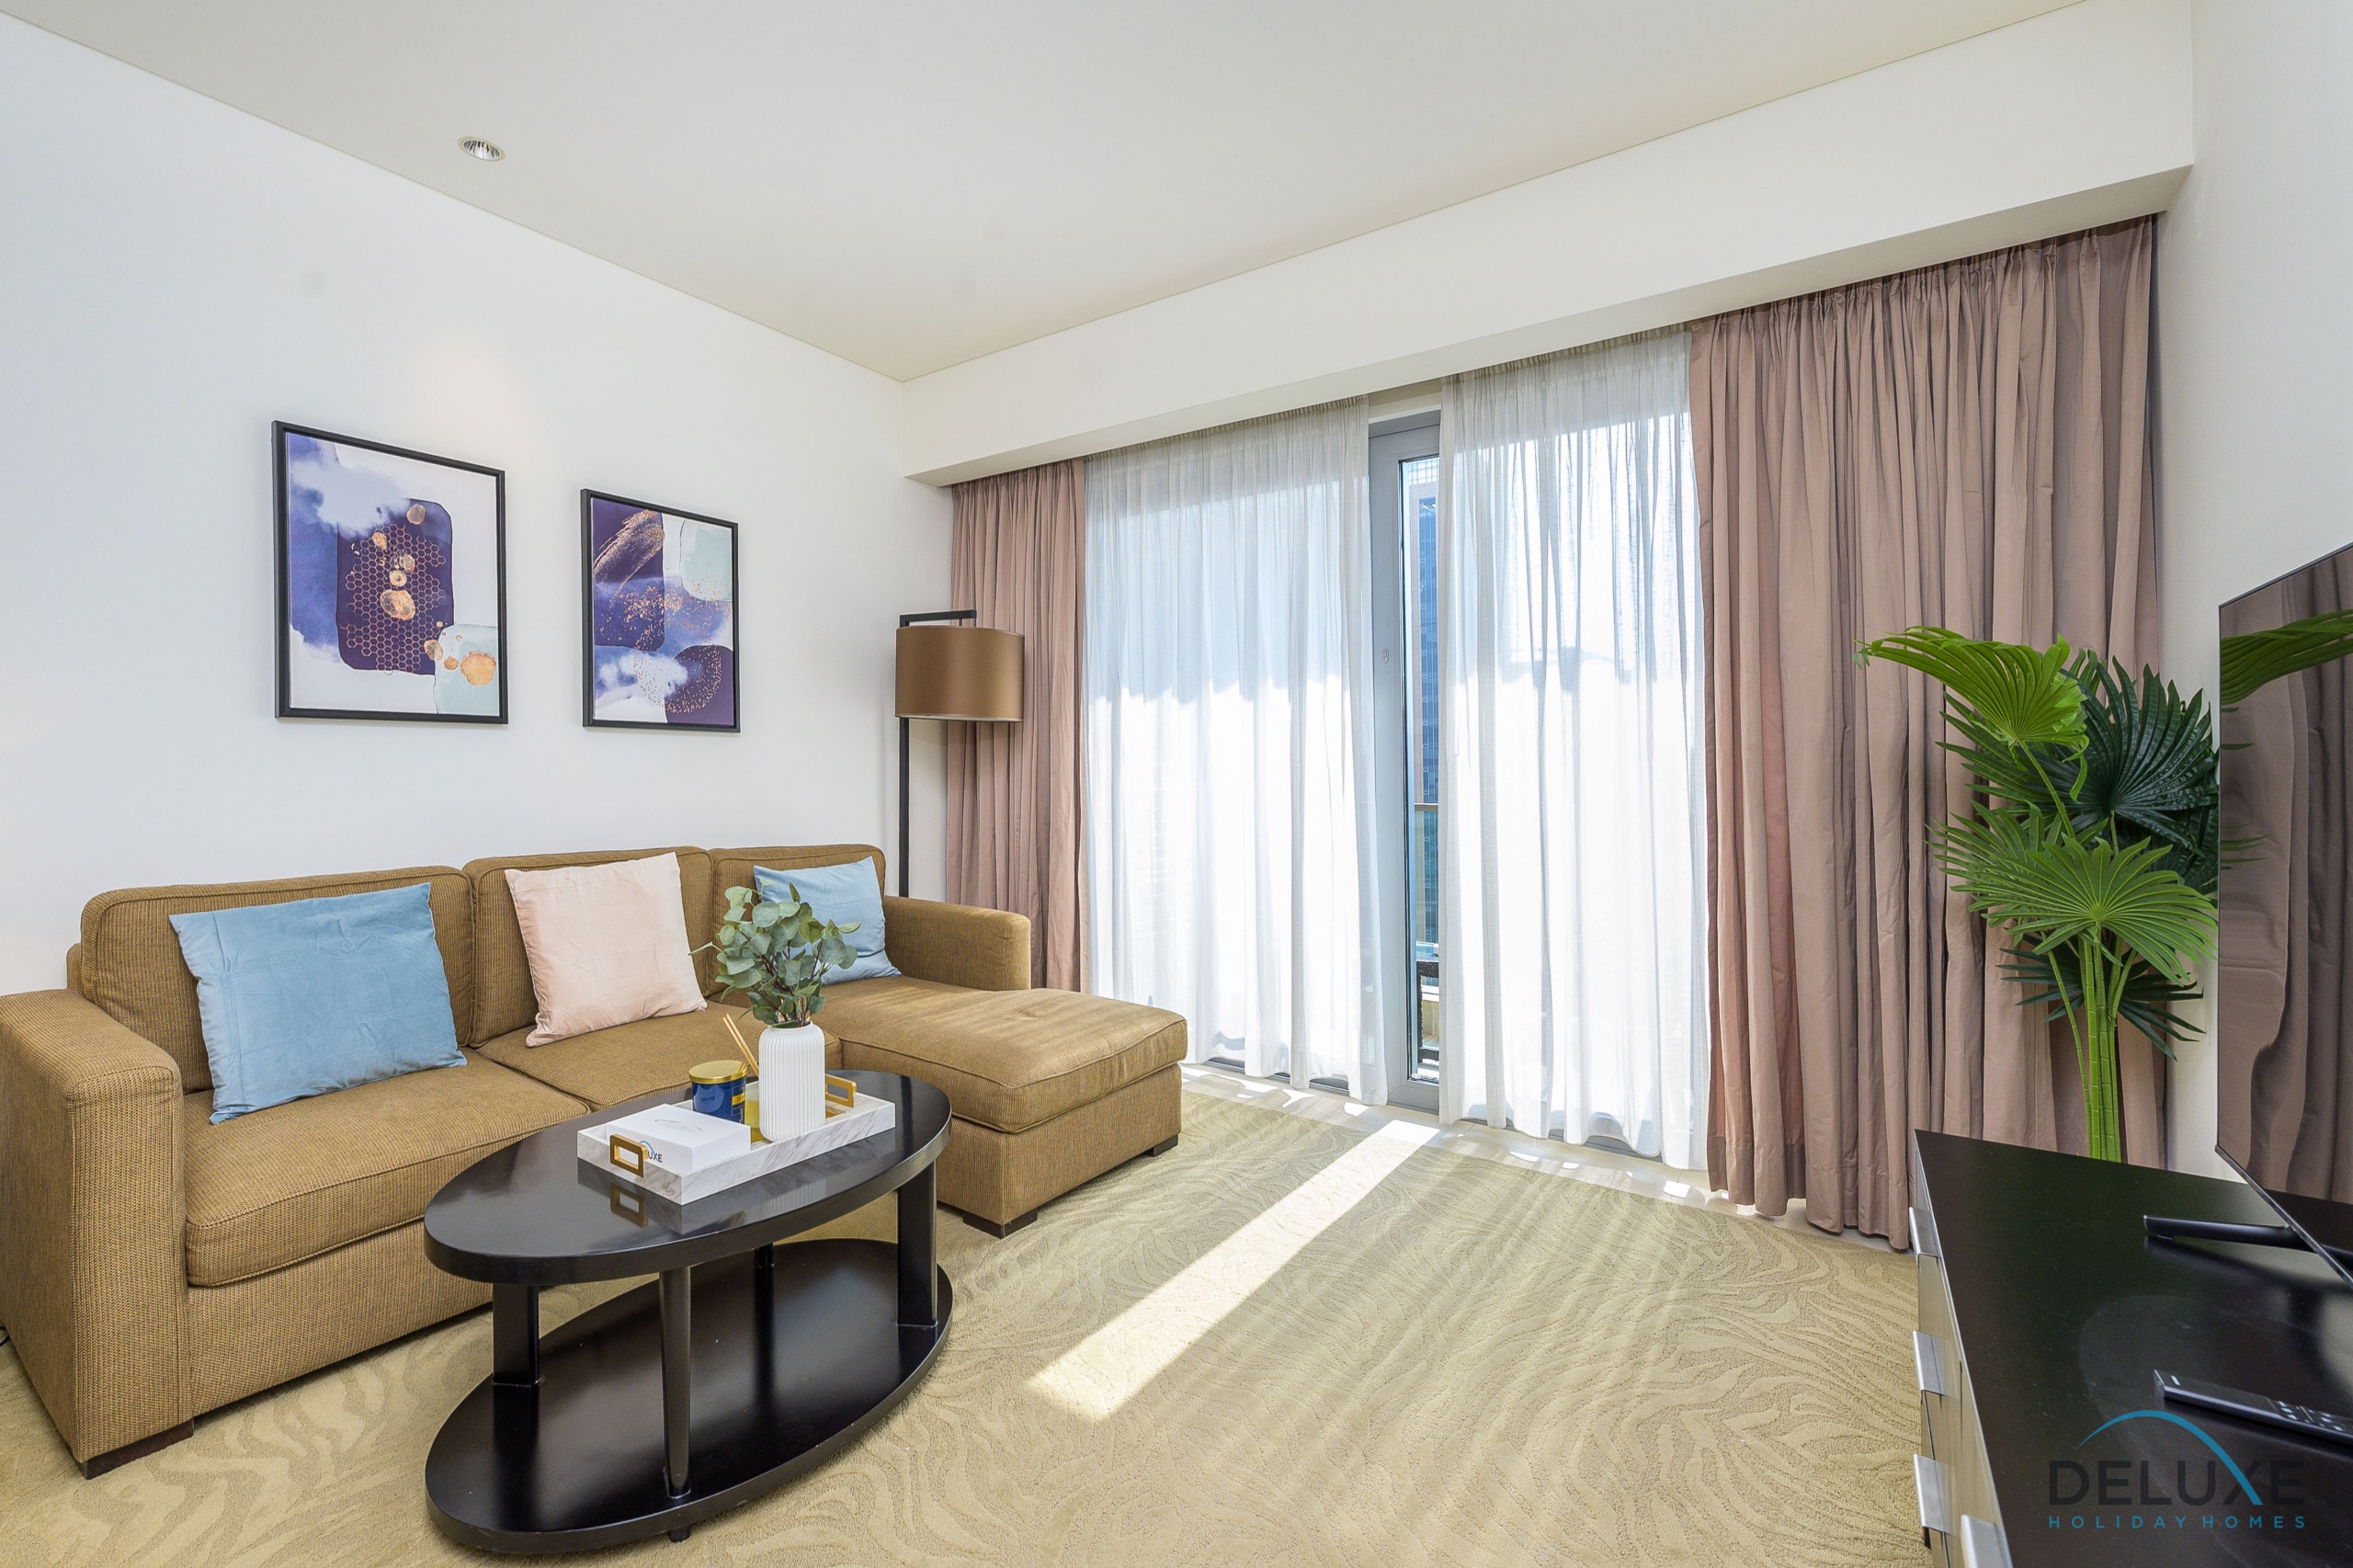 Property Image 1 - Ornate 1BR in The Address Residences Dubai Marina by Property Manager